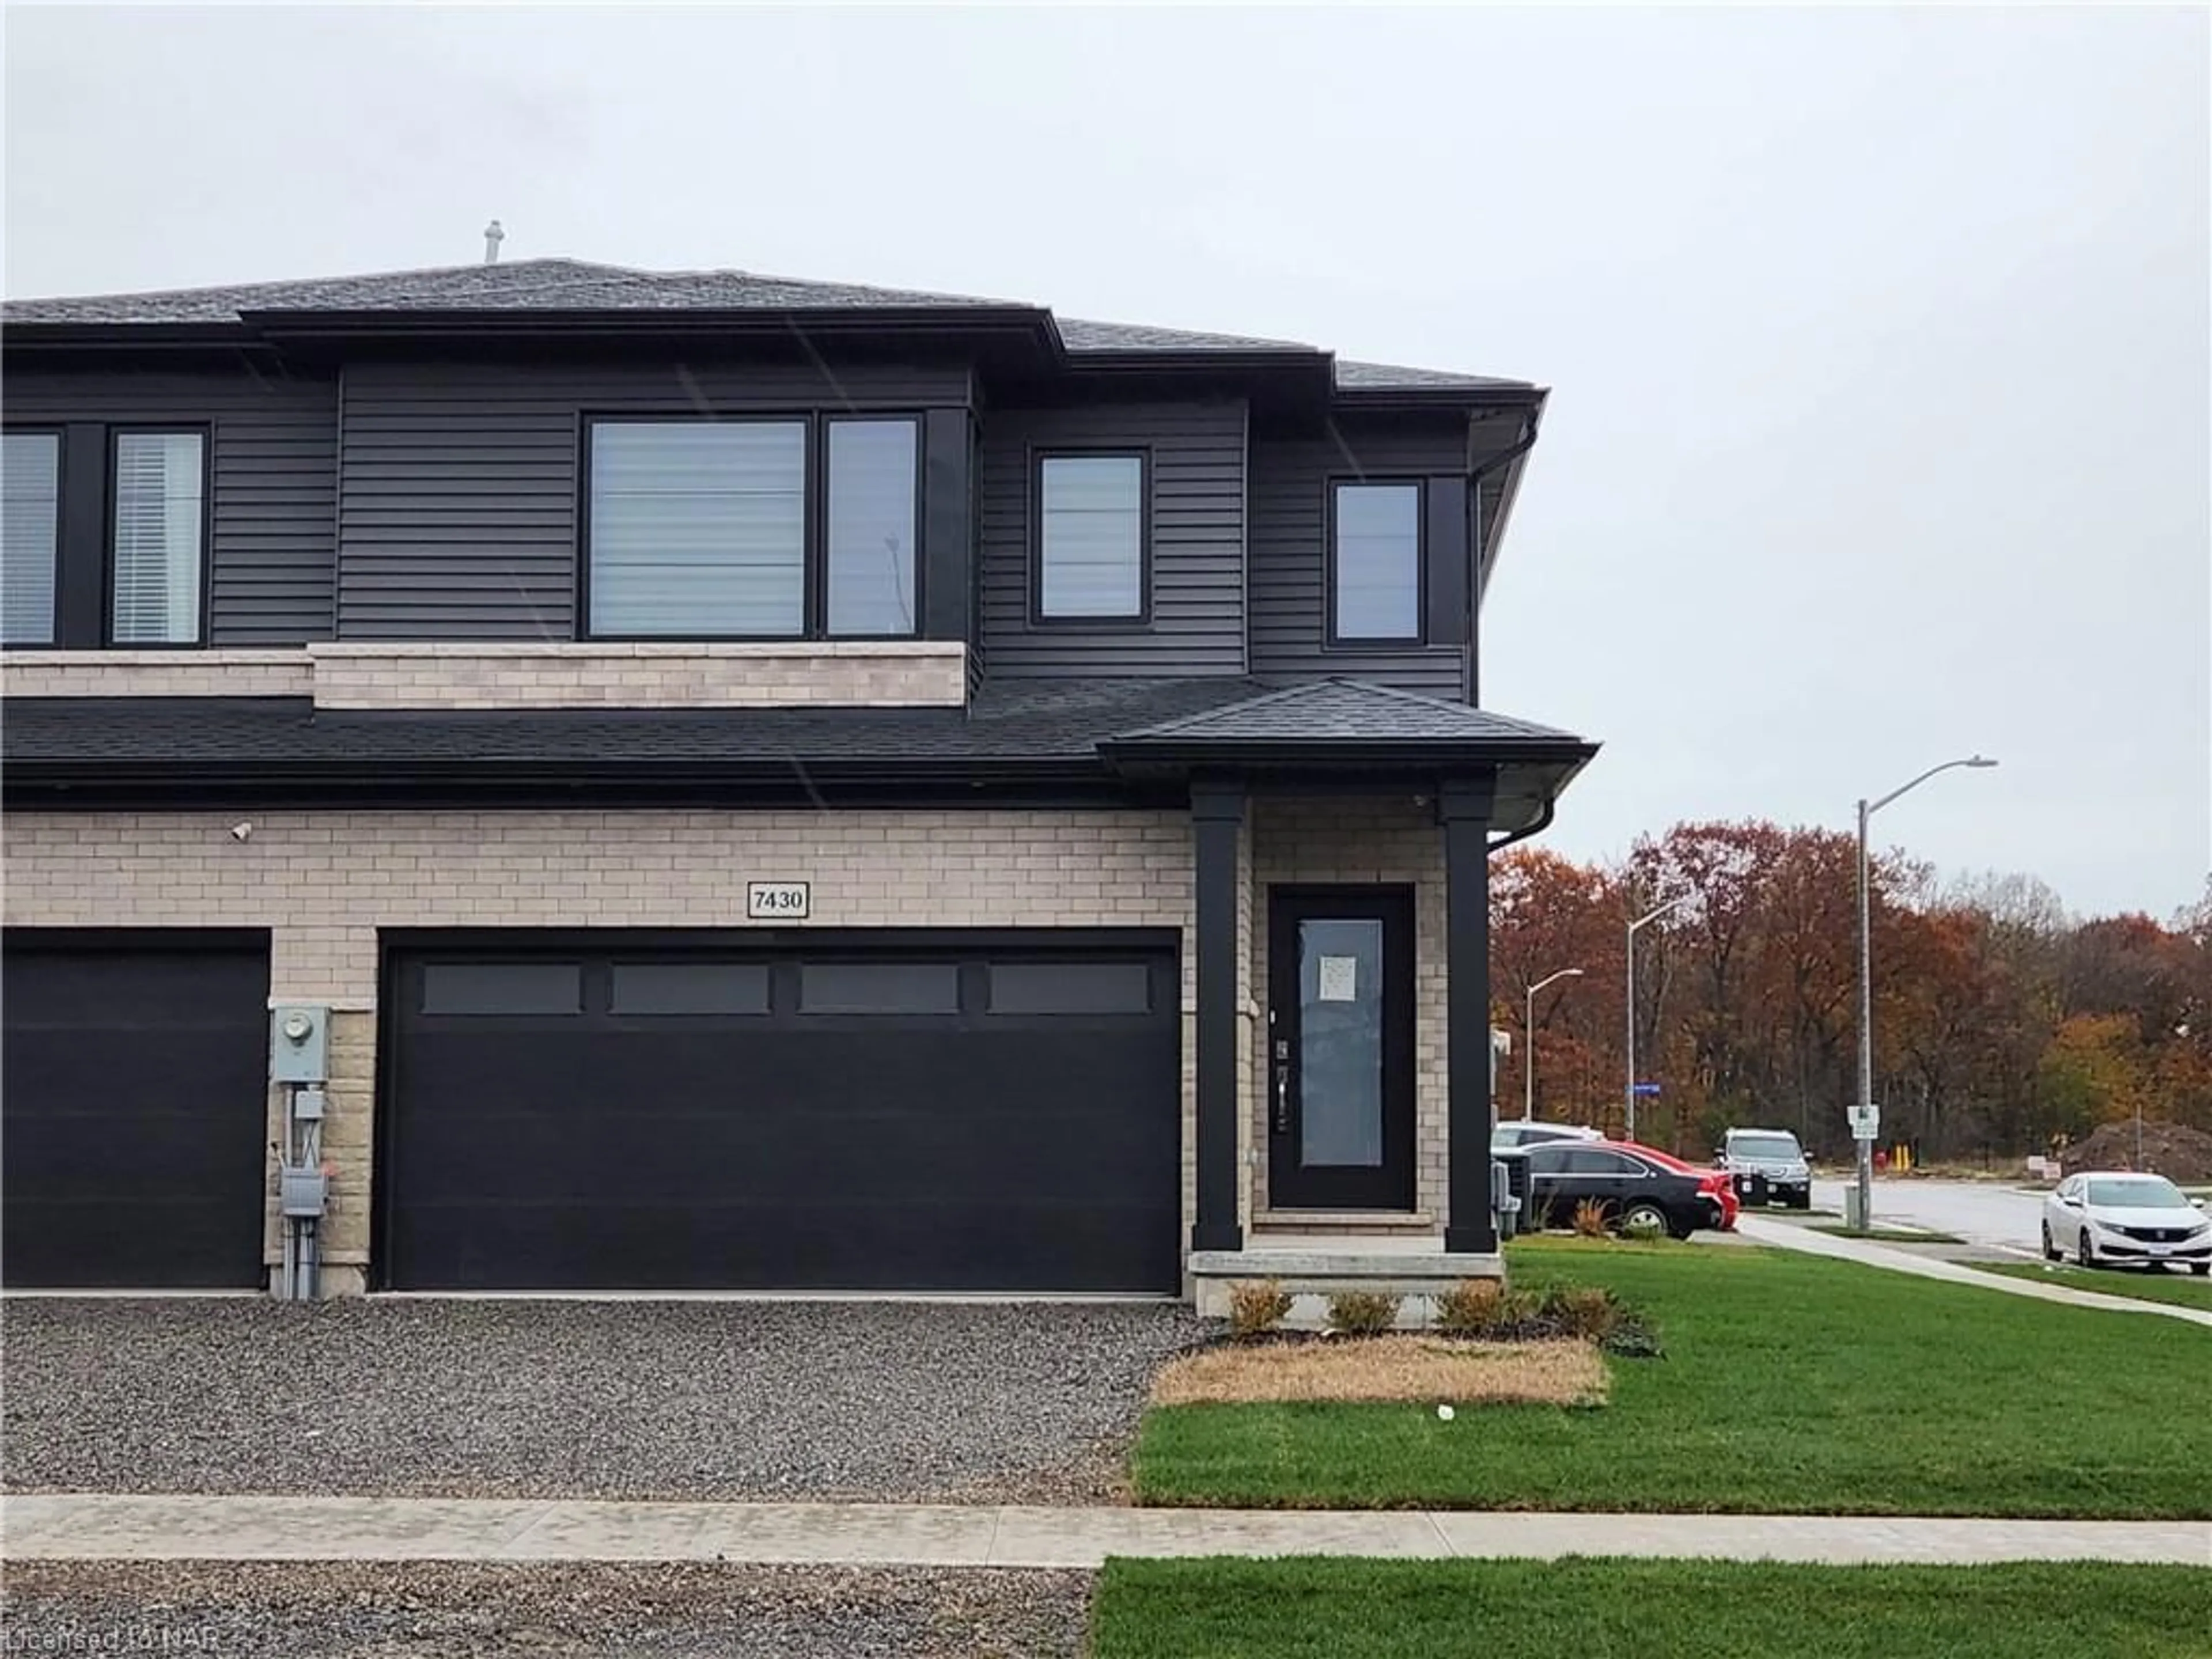 Frontside or backside of a home for 7430 Jonathan Dr, Niagara Falls Ontario L2H 3T4